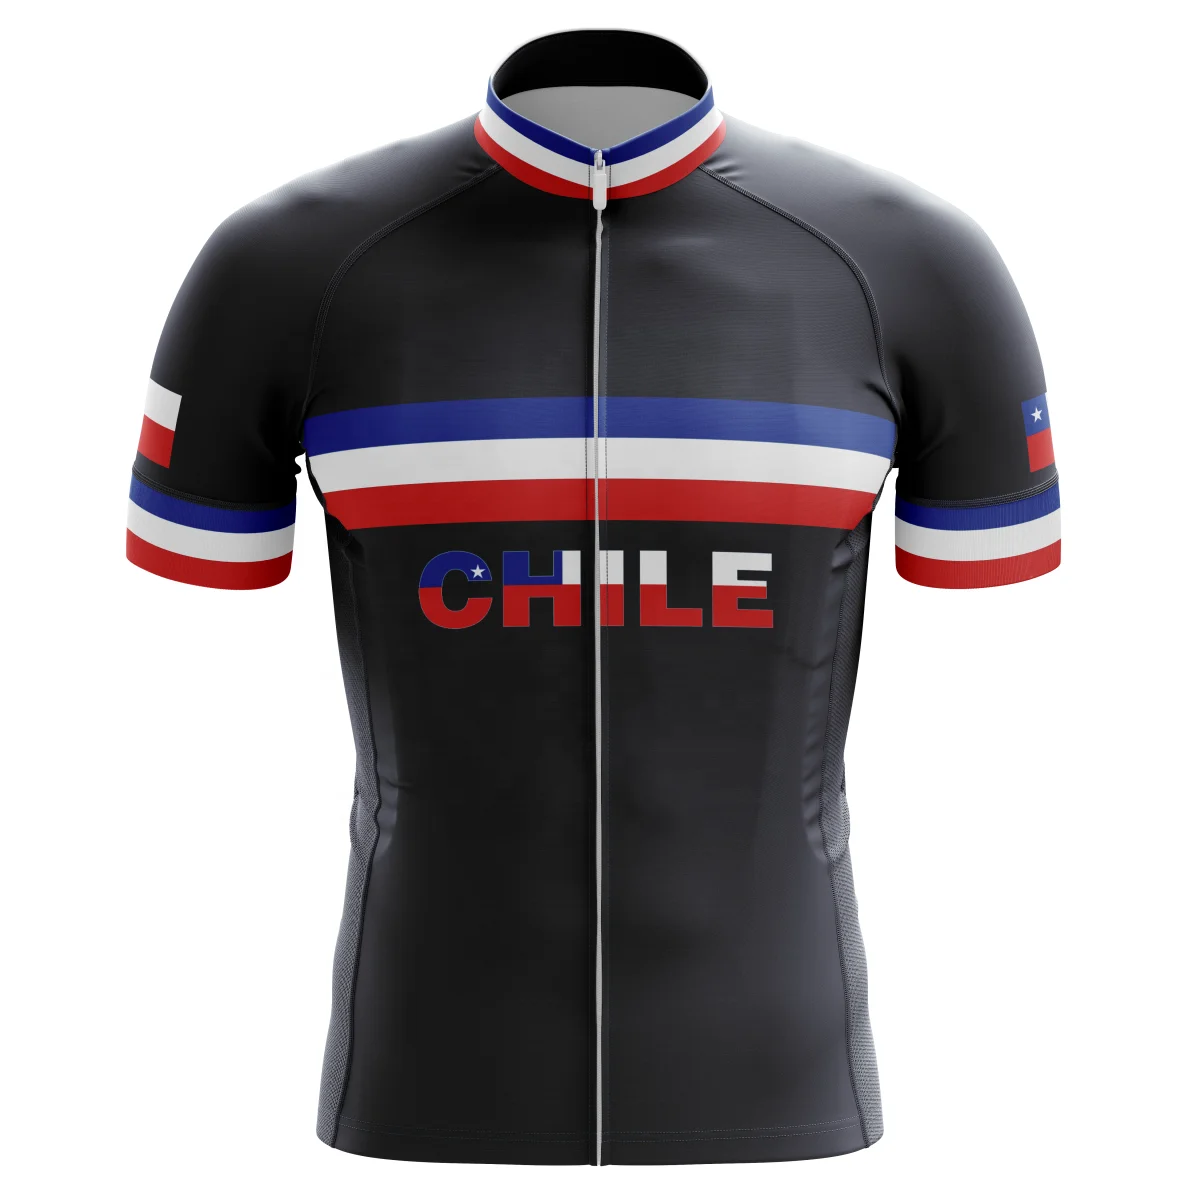 

HIRBGOD New Cycling Jersey for Chile Black Flag Pattern Men's Outdoor Cycling Top Plus Size Bicycle Clothes,TYZ597-01